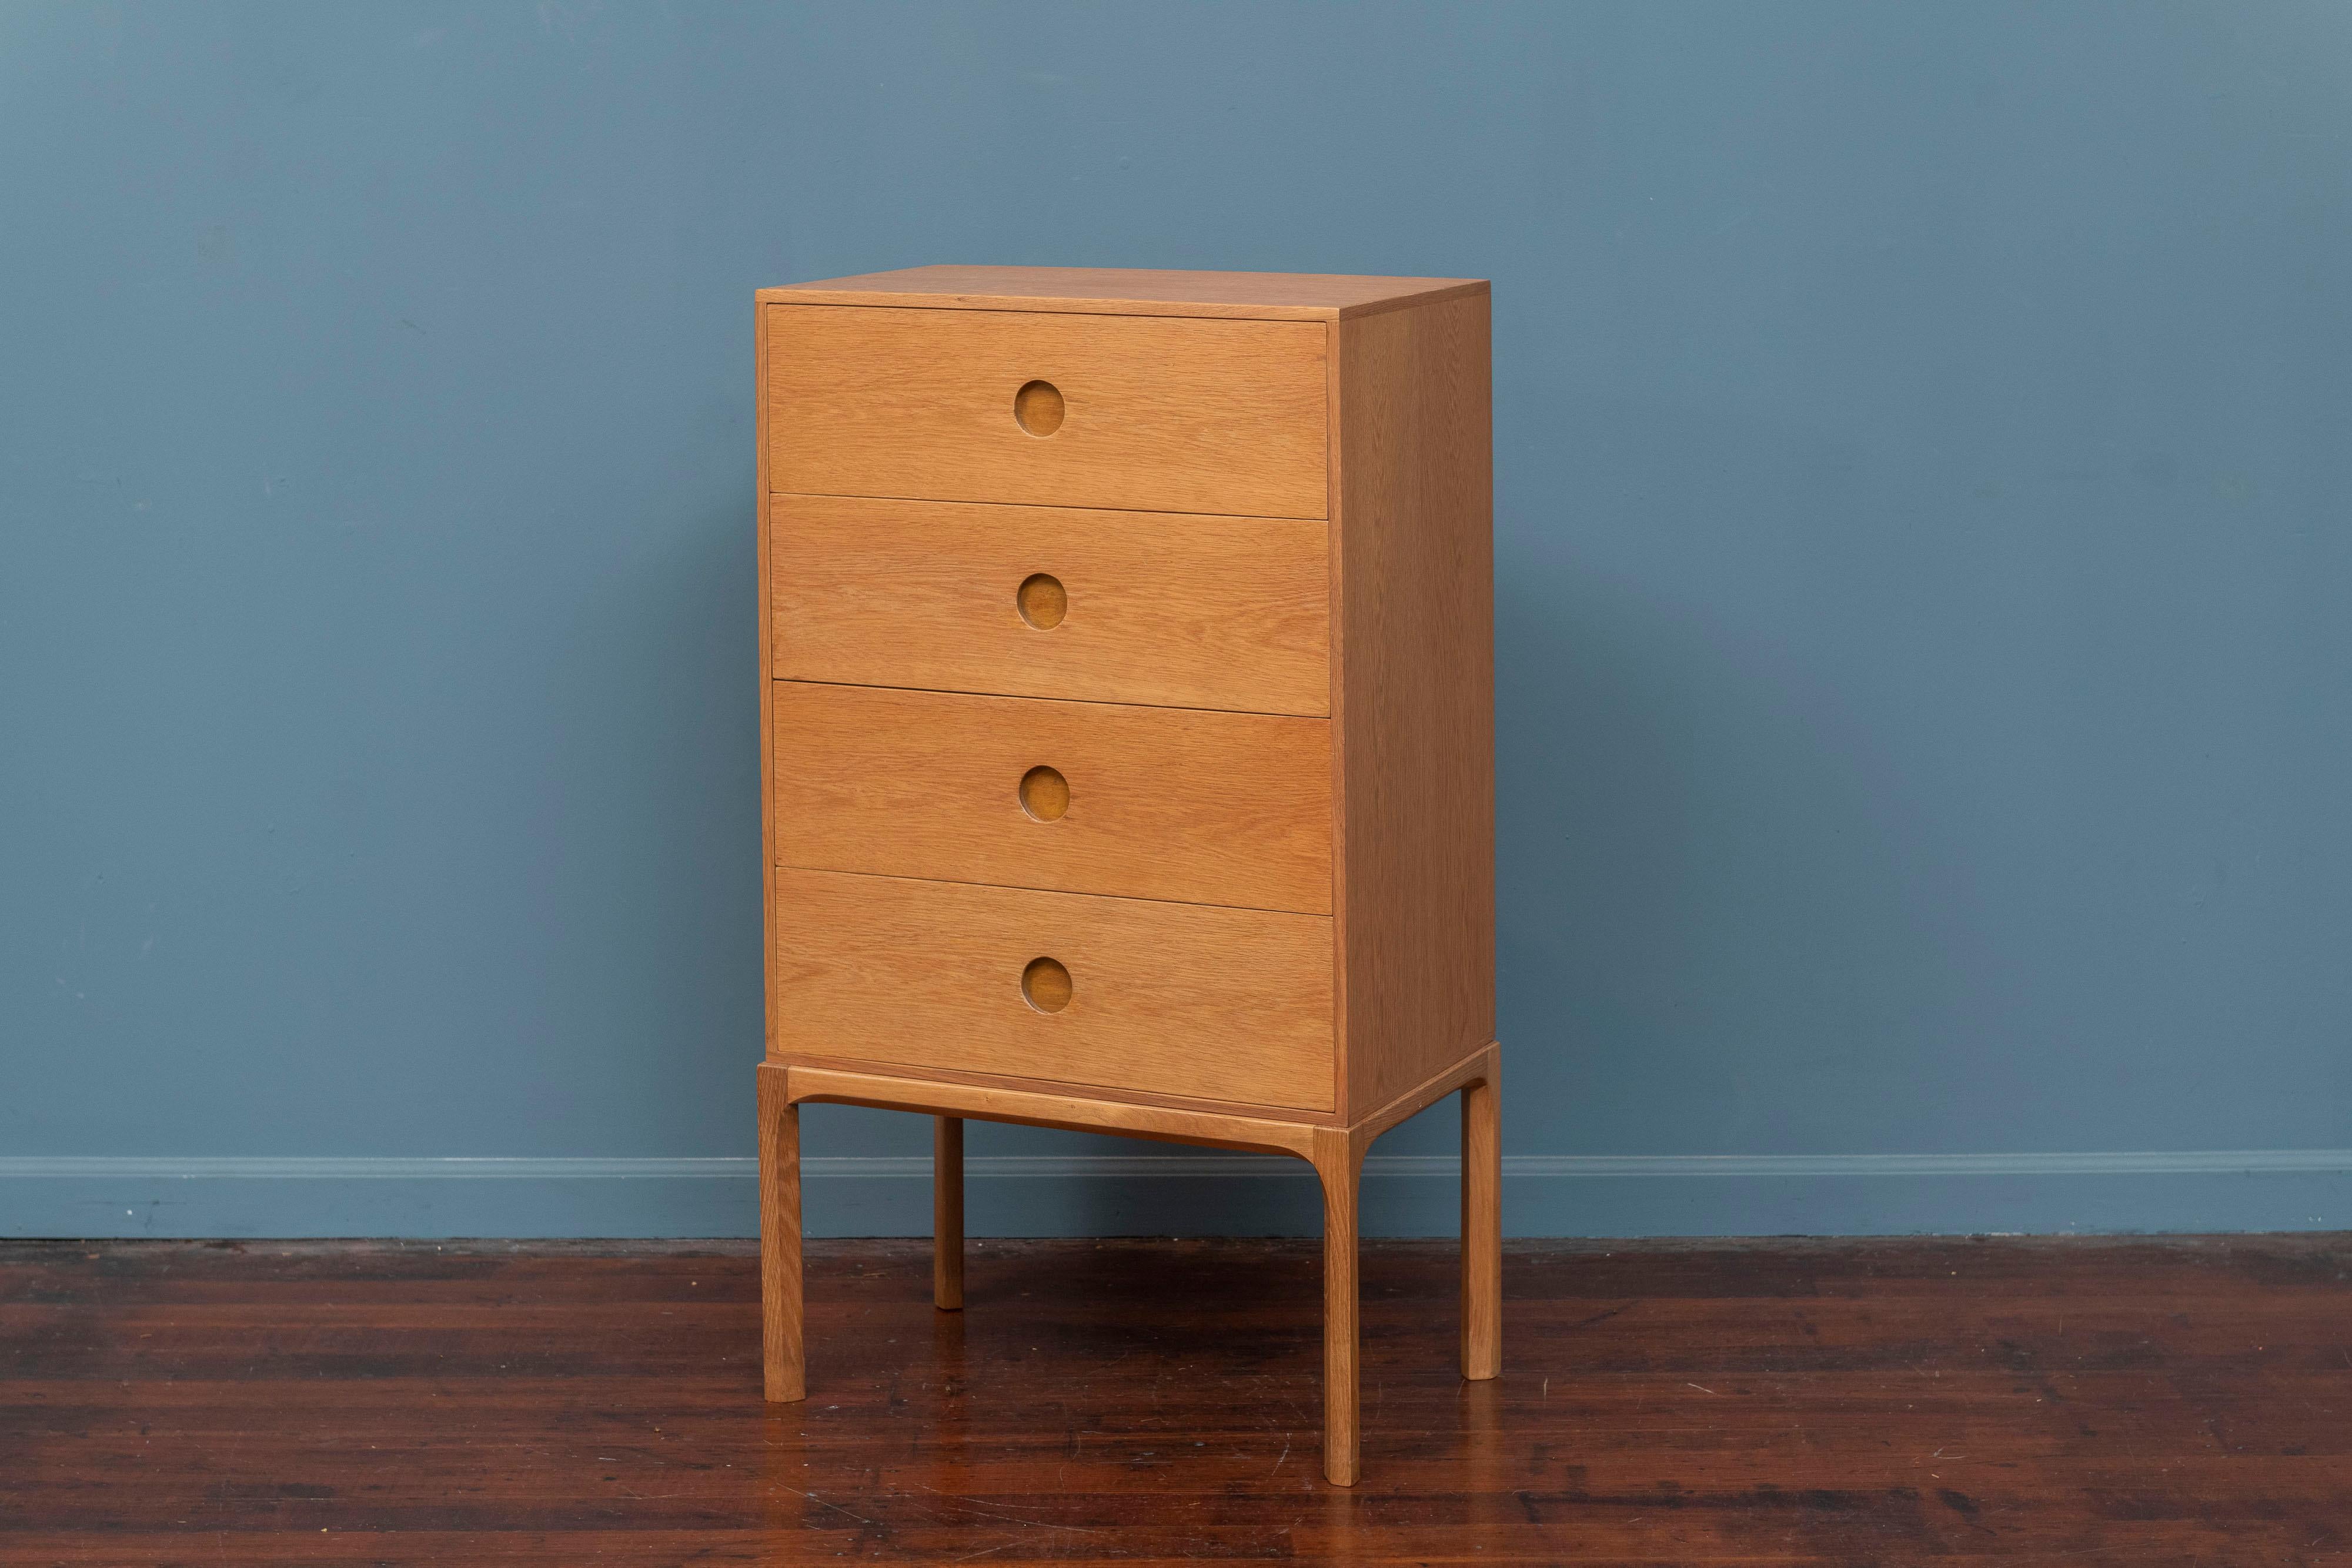 Scandinavian Modern four drawer chest designed by Kai Kristiansen for Askel Kjaersgaard, Model 835. Made from the high quality solid teak with attention to detail, sculpted edges, circlular drawer pulls and dove tail constructed drawers. 
A very